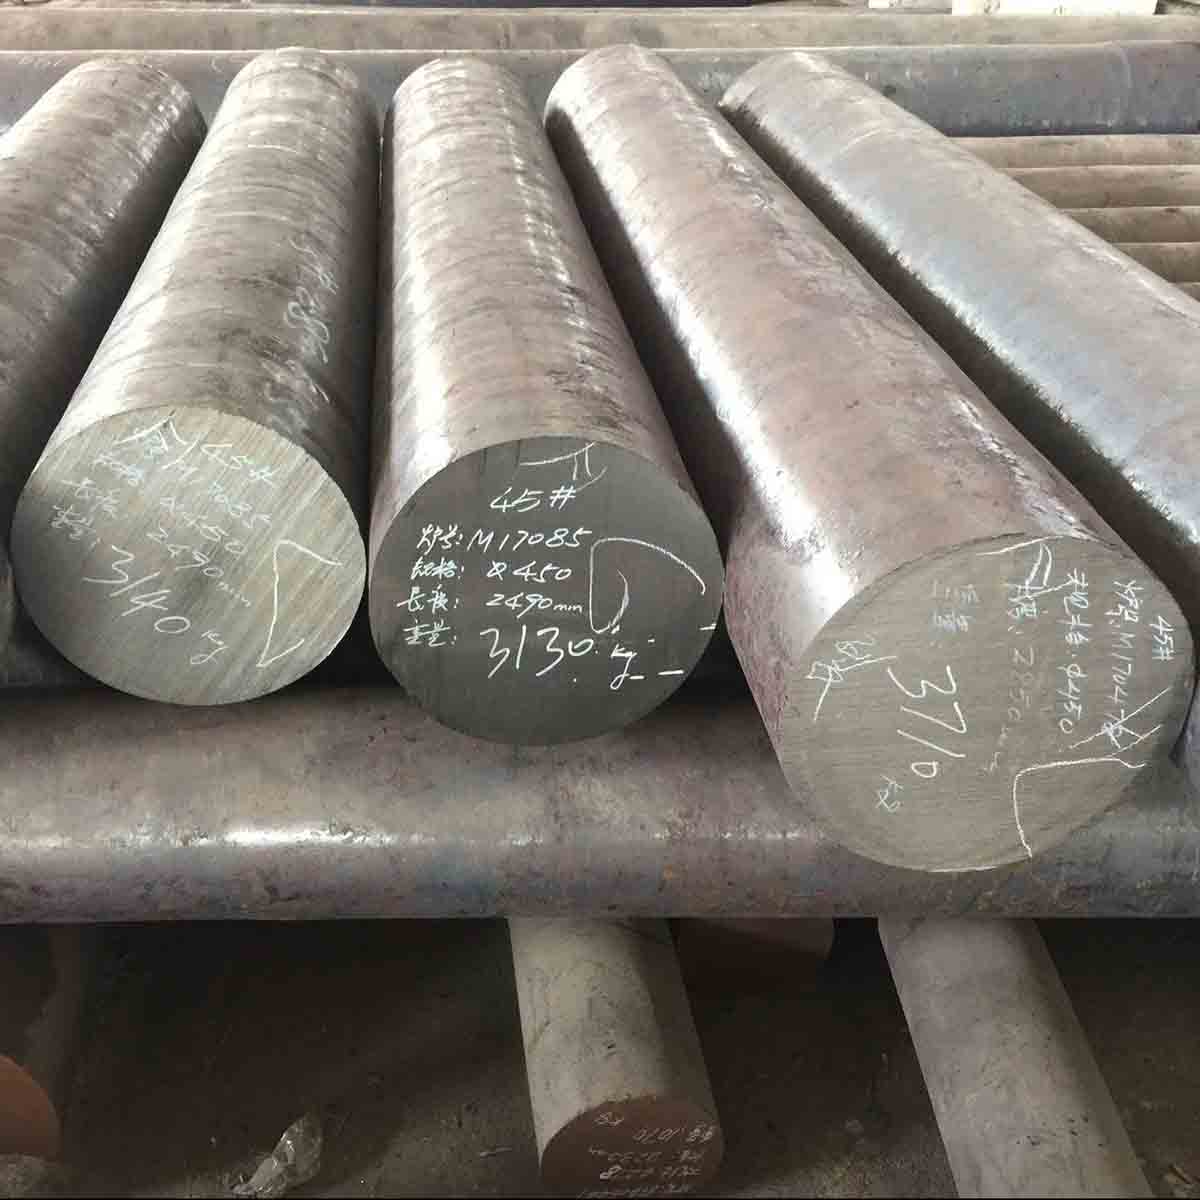 C35 Carbon Steel Round Bars Manufacturers, Suppliers, Importers, Dealers in Mumbai India